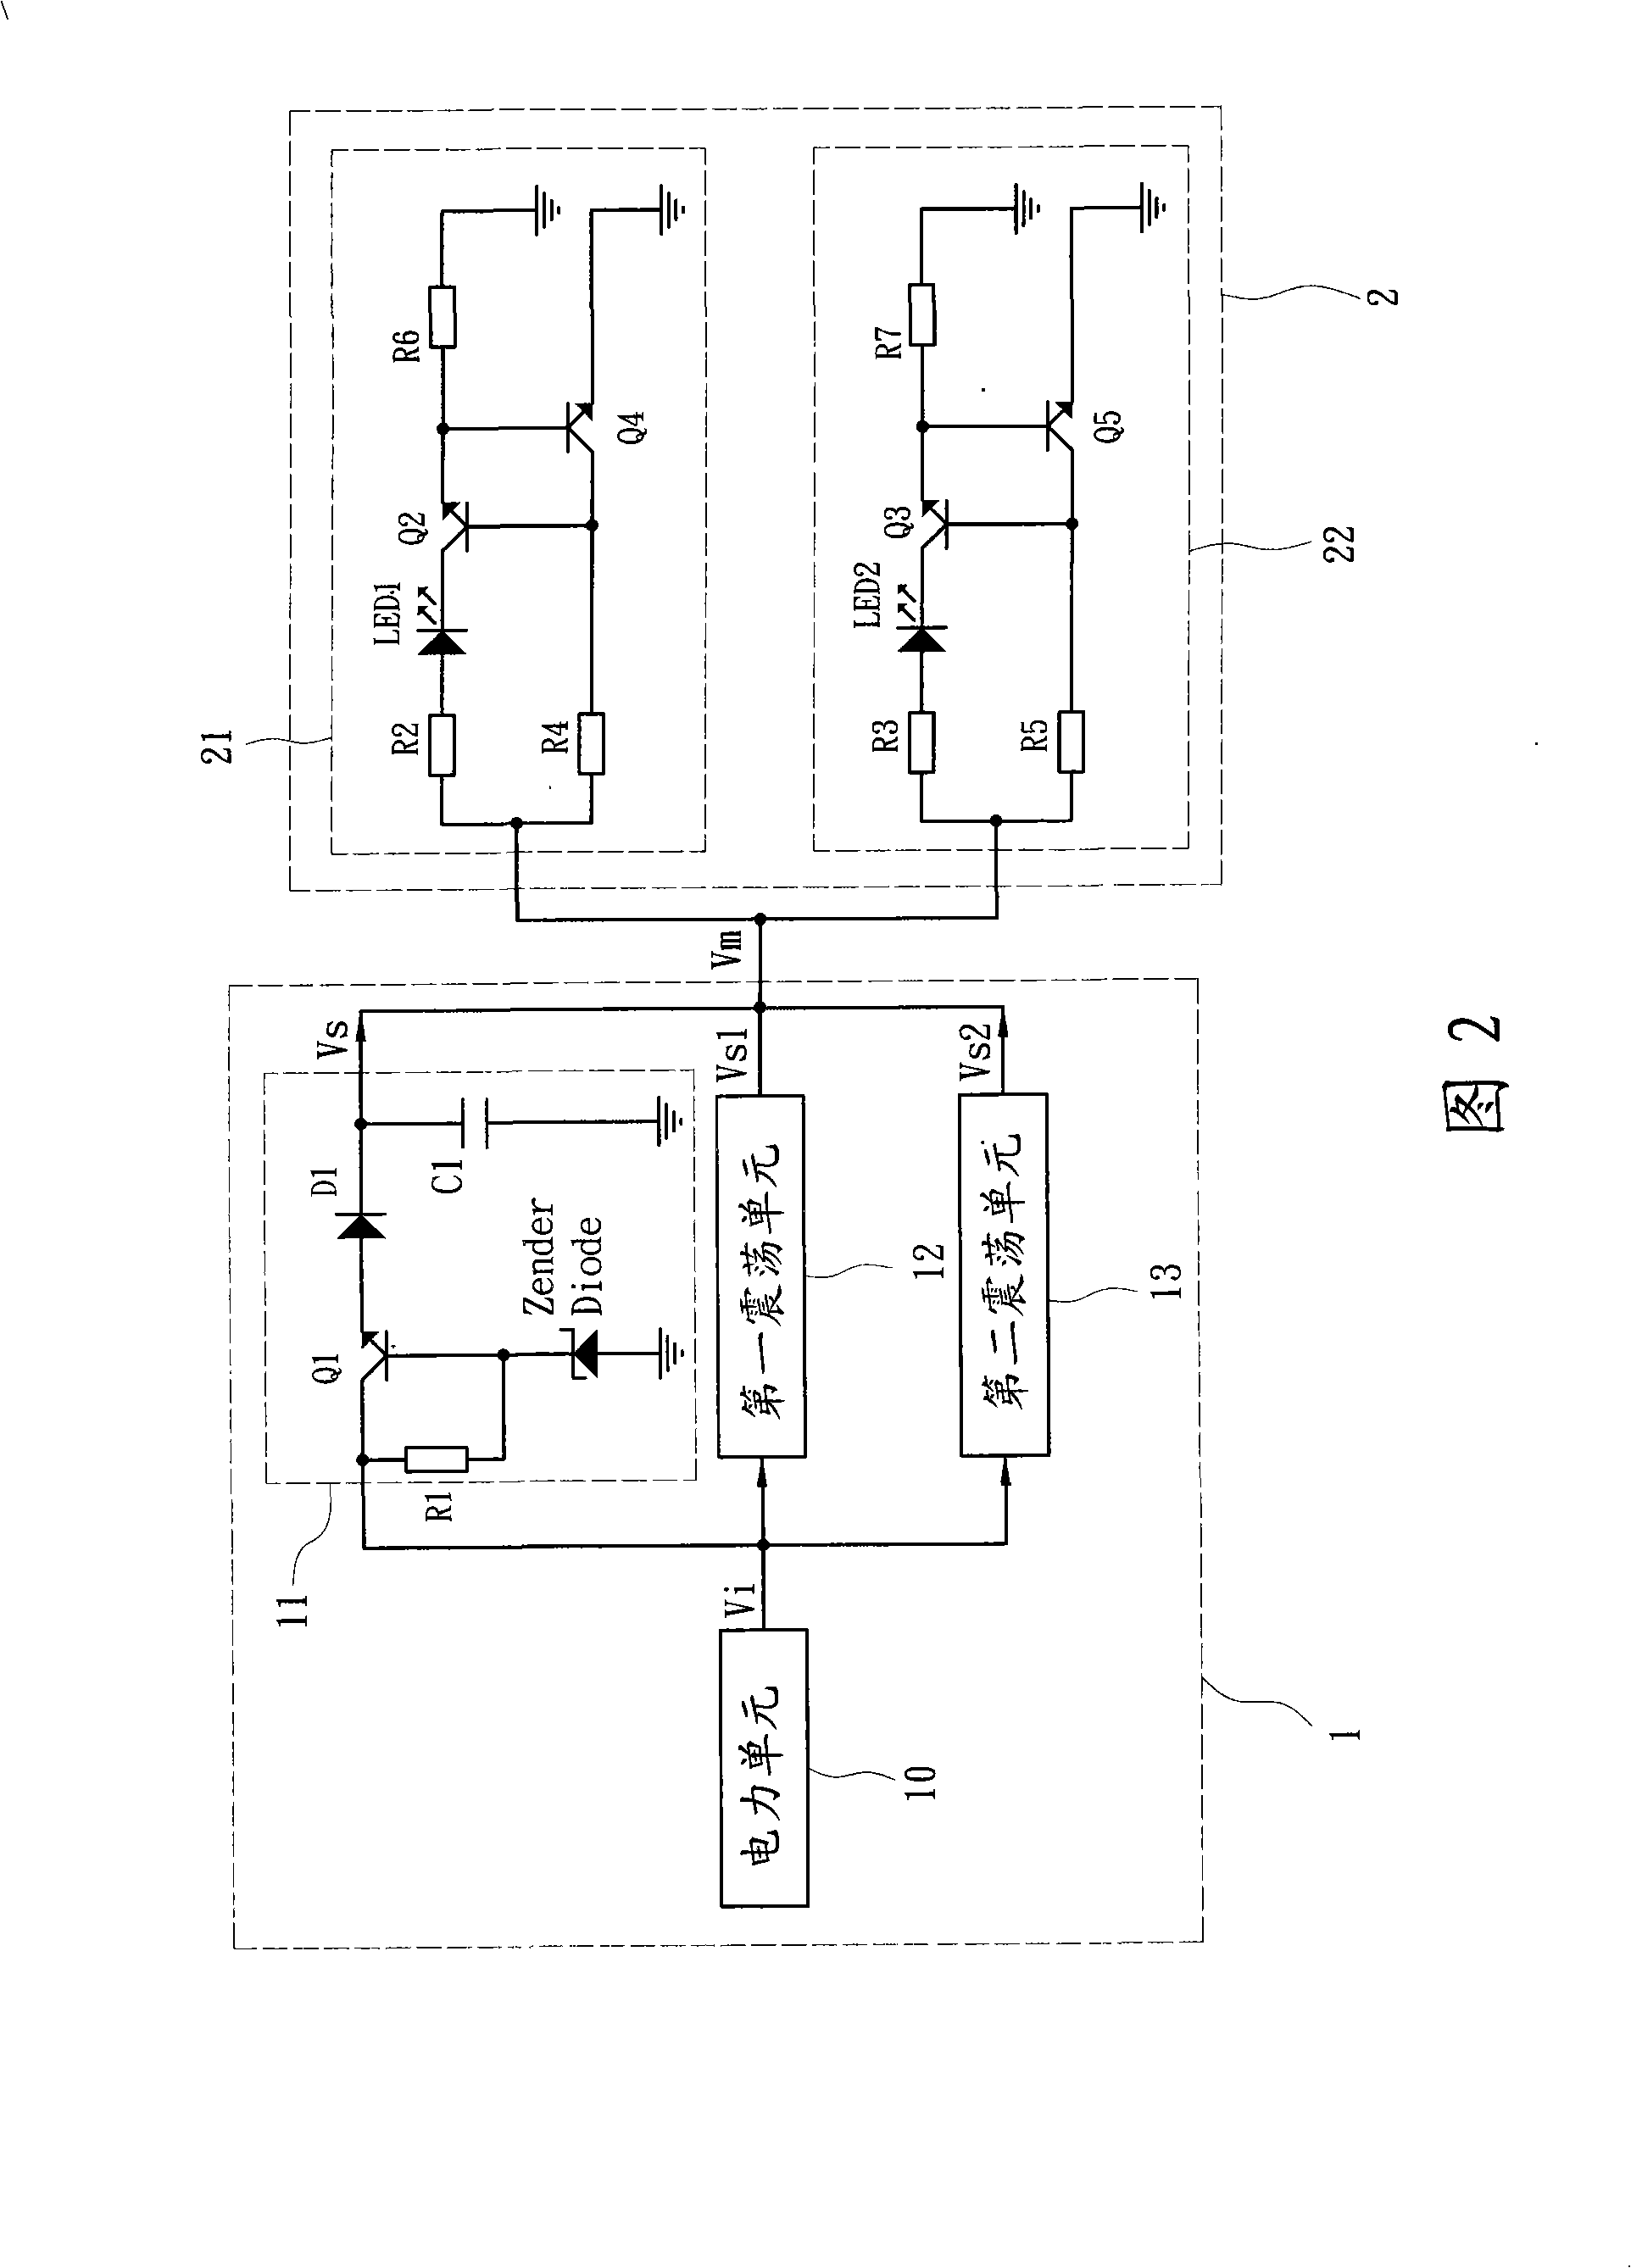 Control circuit of LED rear-view mirror